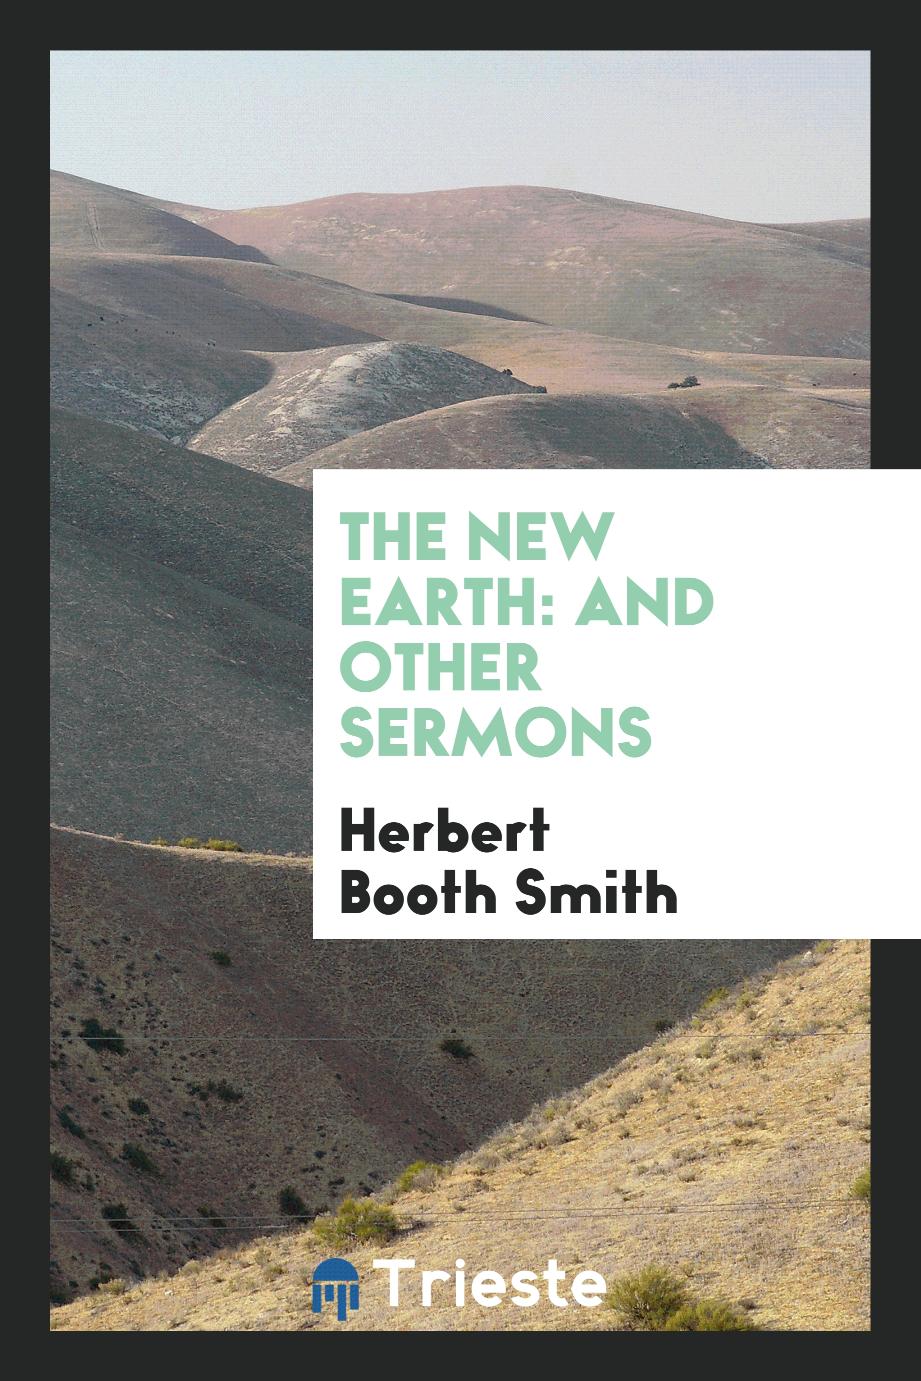 The new earth: and other sermons